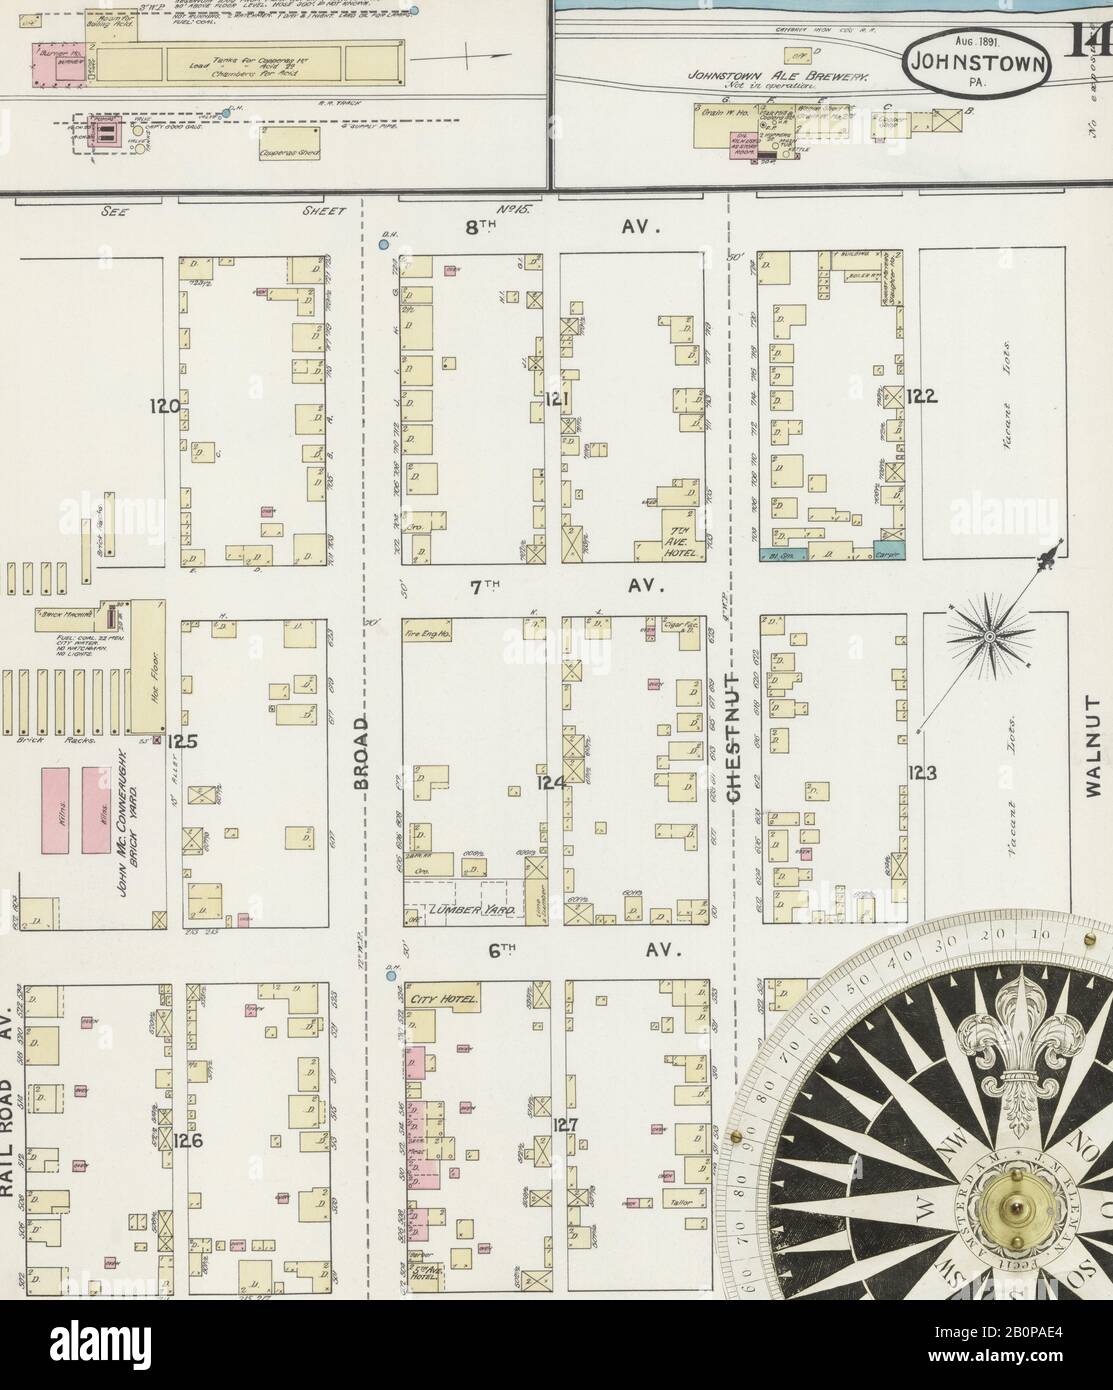 Image 14 of Sanborn Fire Insurance Map from Johnstown, Cambria County, Pennsylvania. Aug 1891. 21 Sheet(s), America, street map with a Nineteenth Century compass Stock Photo